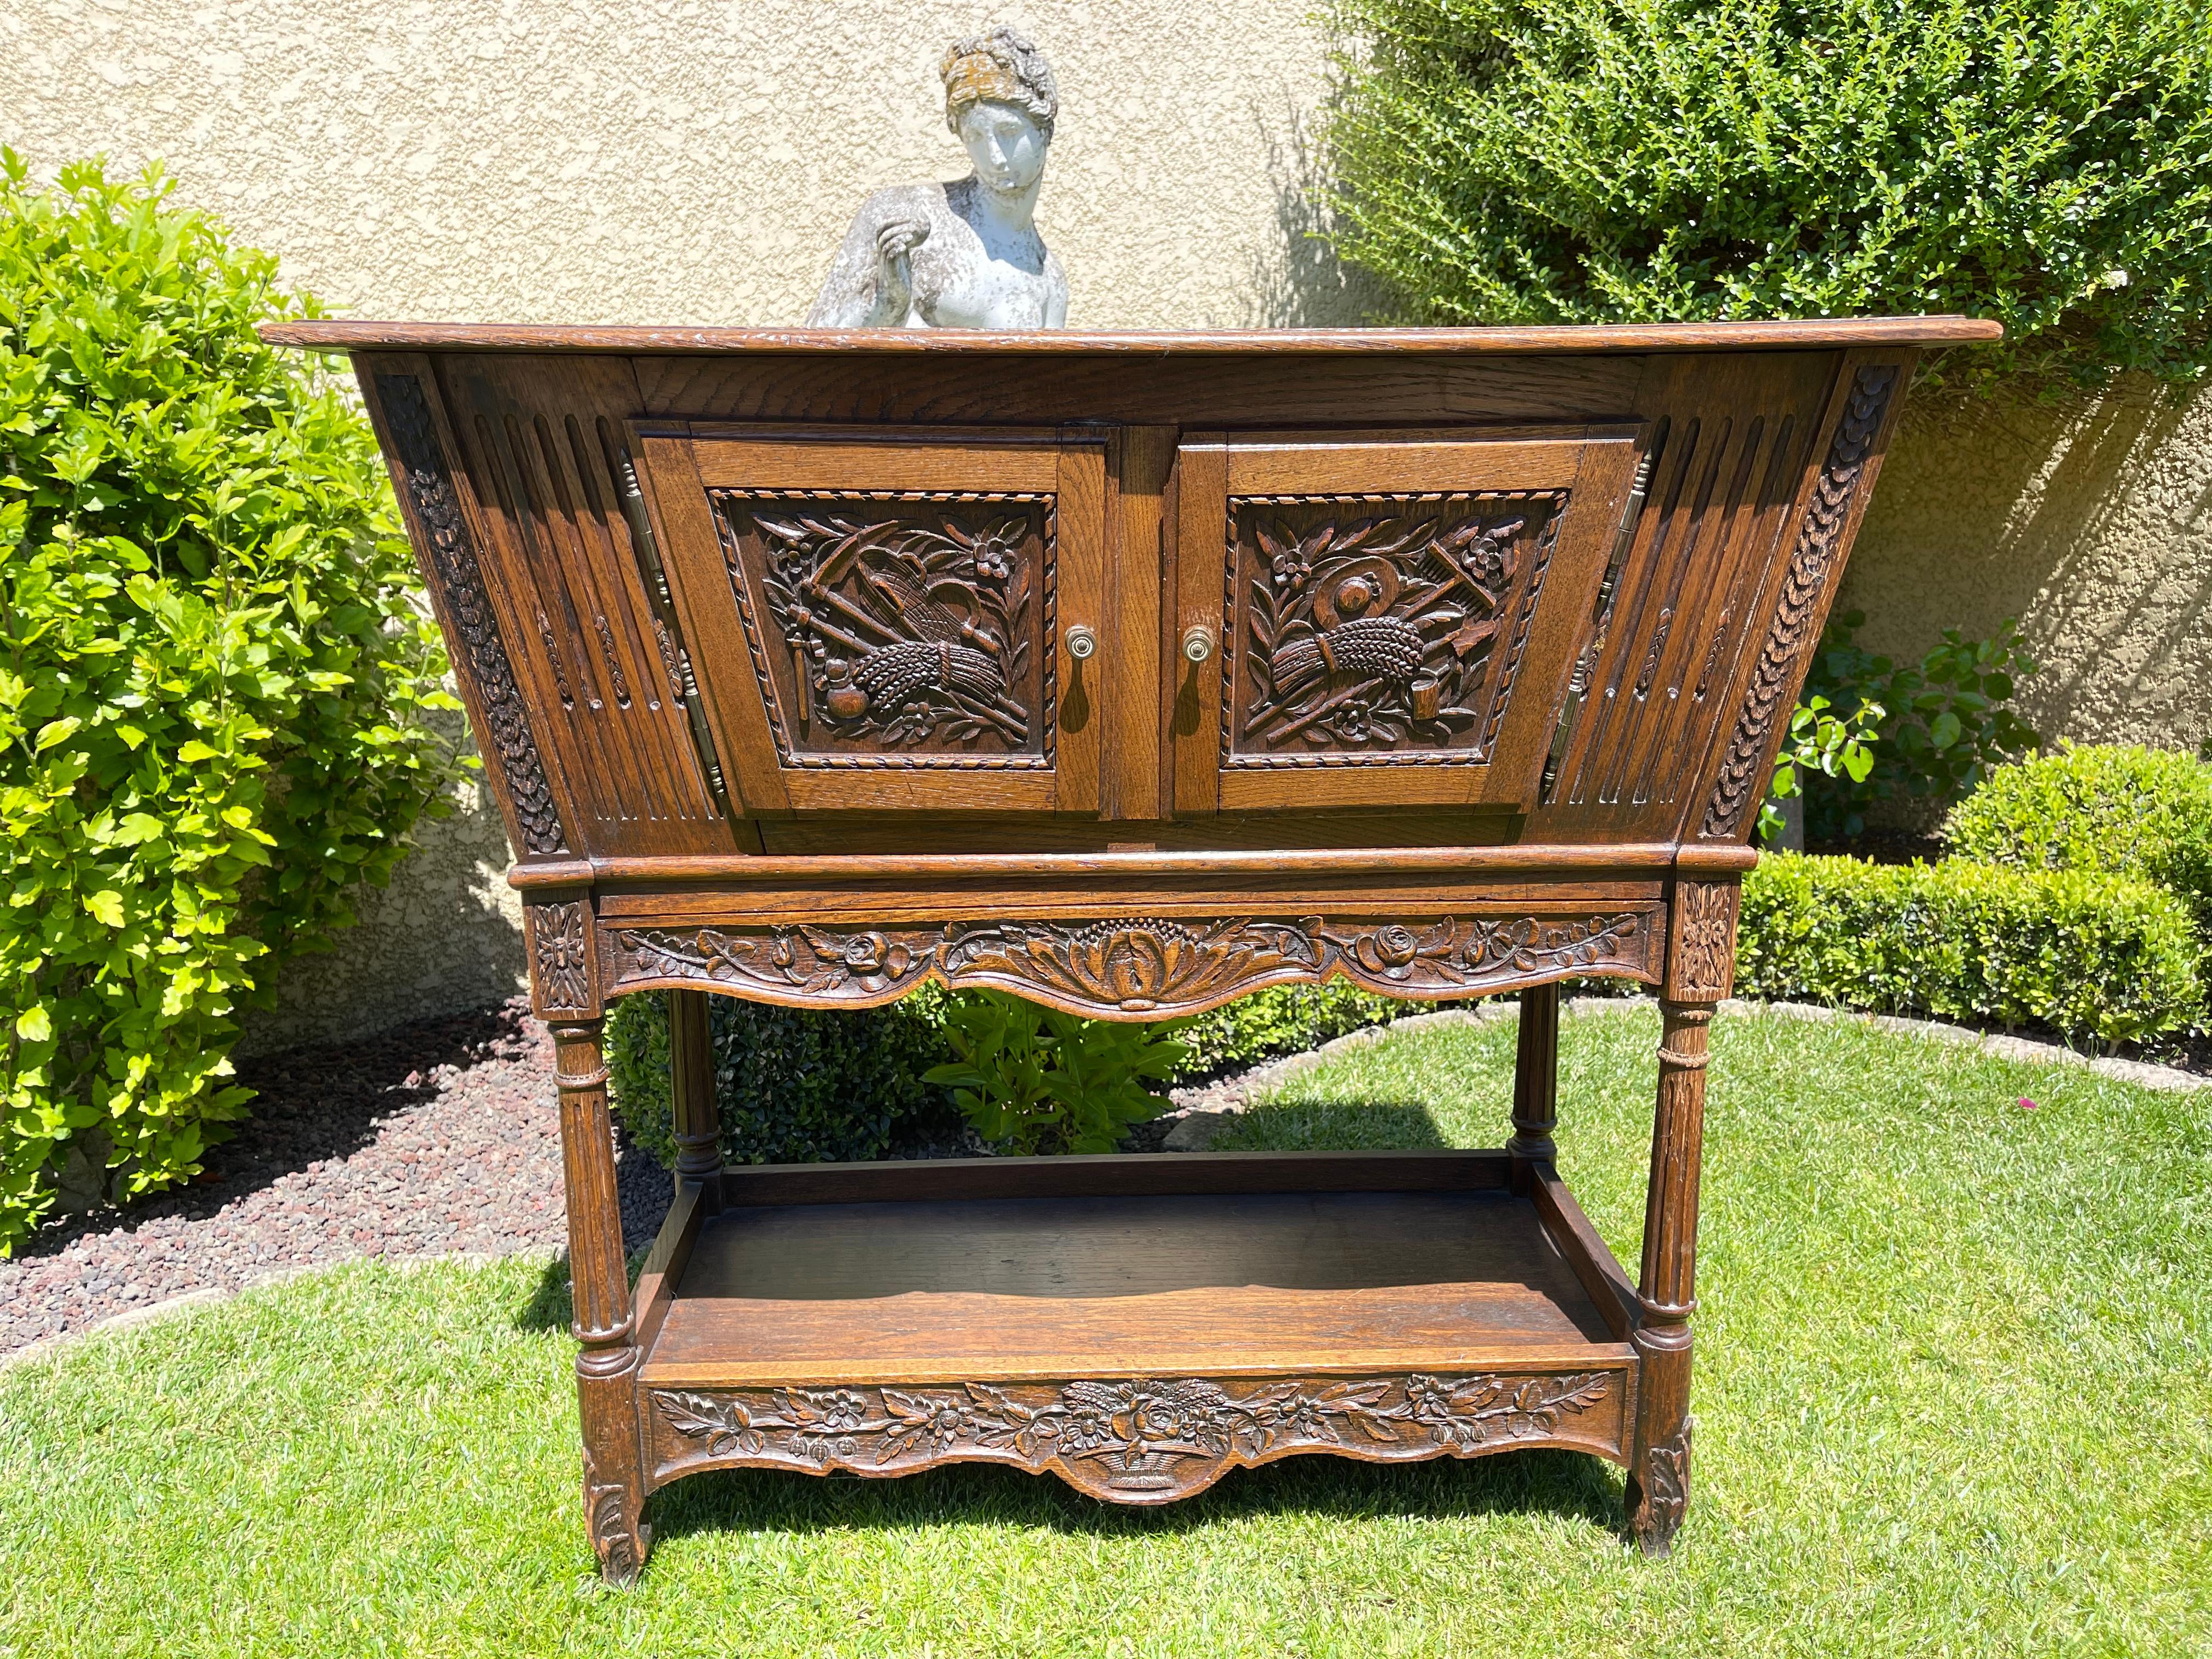 Lovely Provencal kneader in carved oak in good condition. 2 doors and a drawer. French work of the 19th Century.